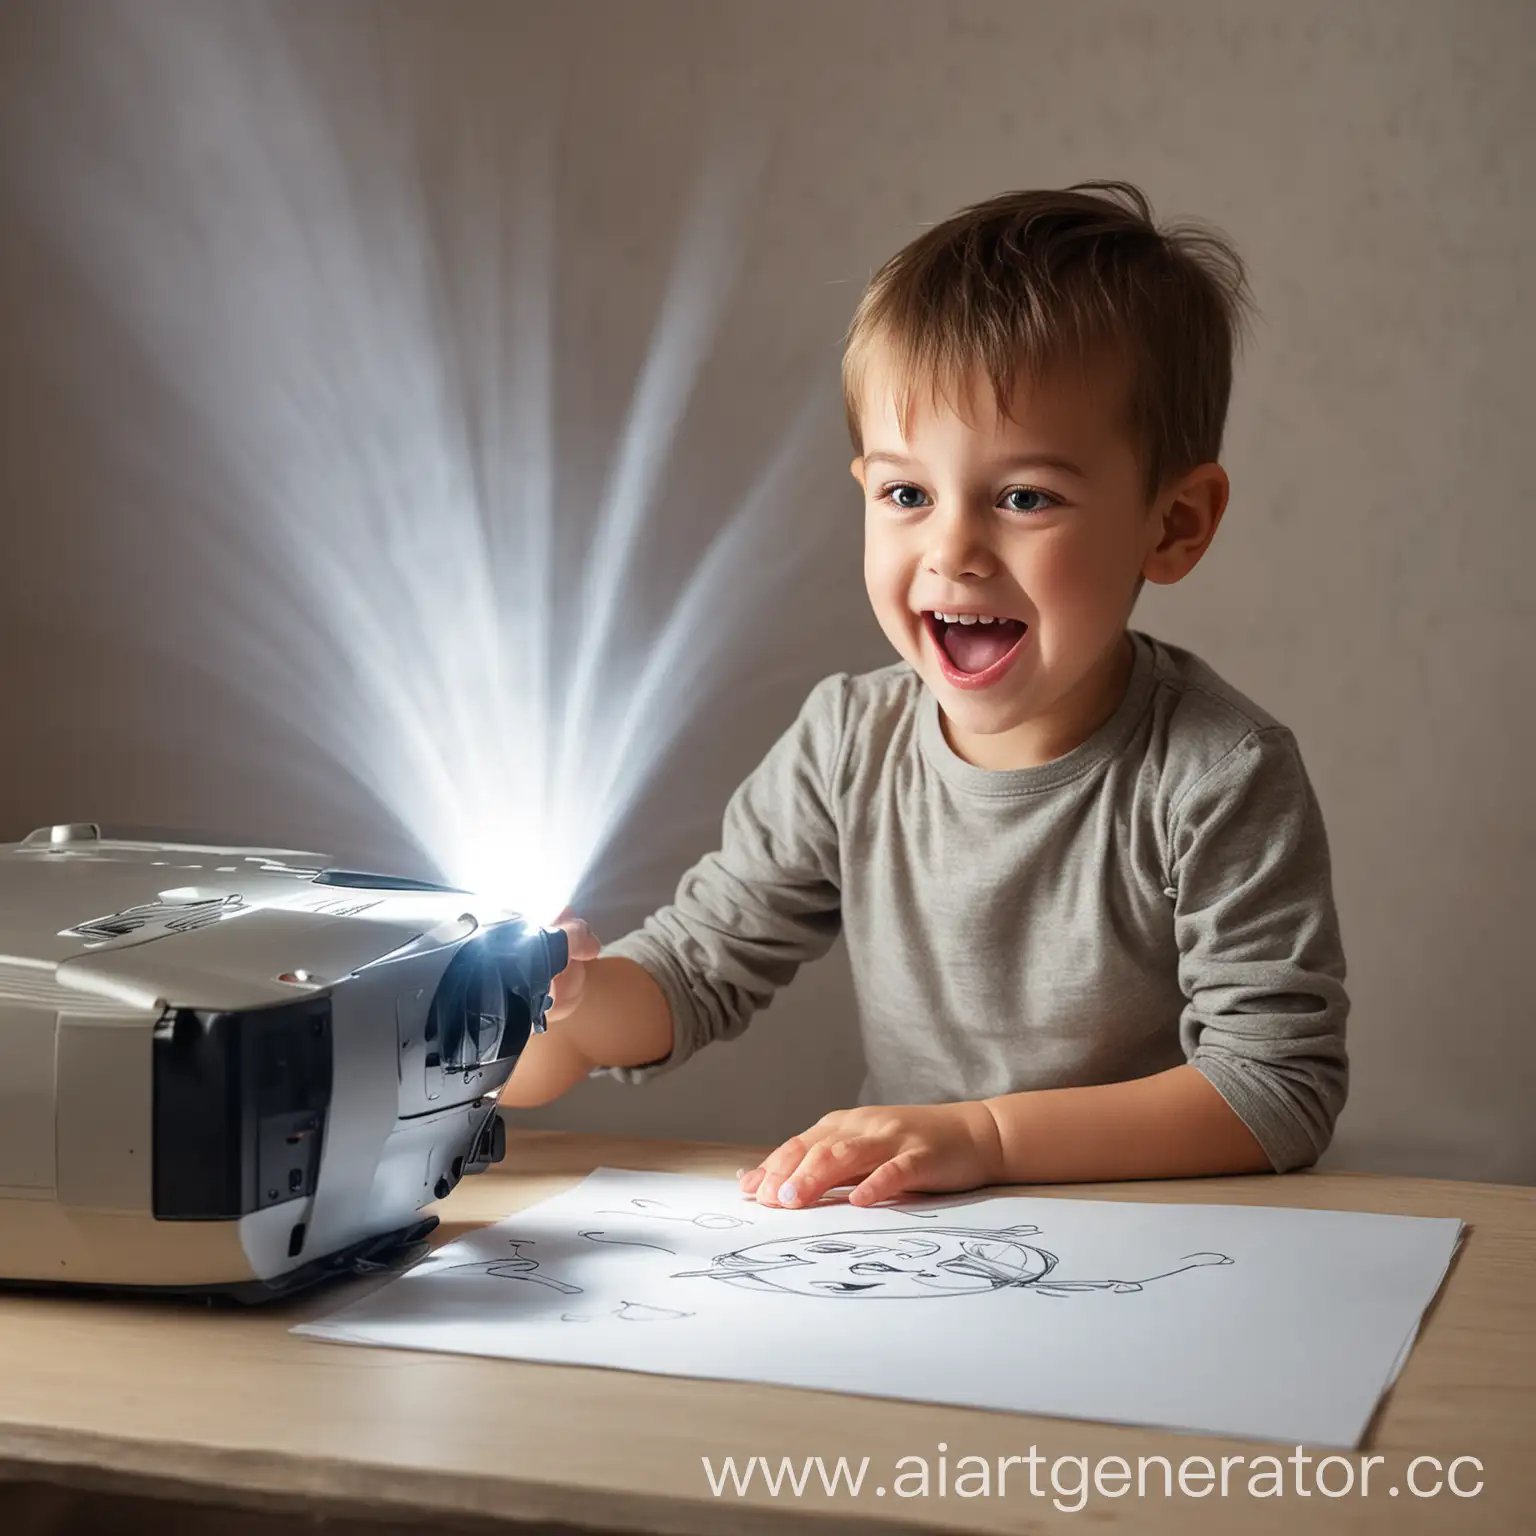 a very happy child plays (draws) with a new drawing projector. Here it's important to convey involvement and joy from the new acquisition. Emotions are everything! It should create the impression of a successful photo